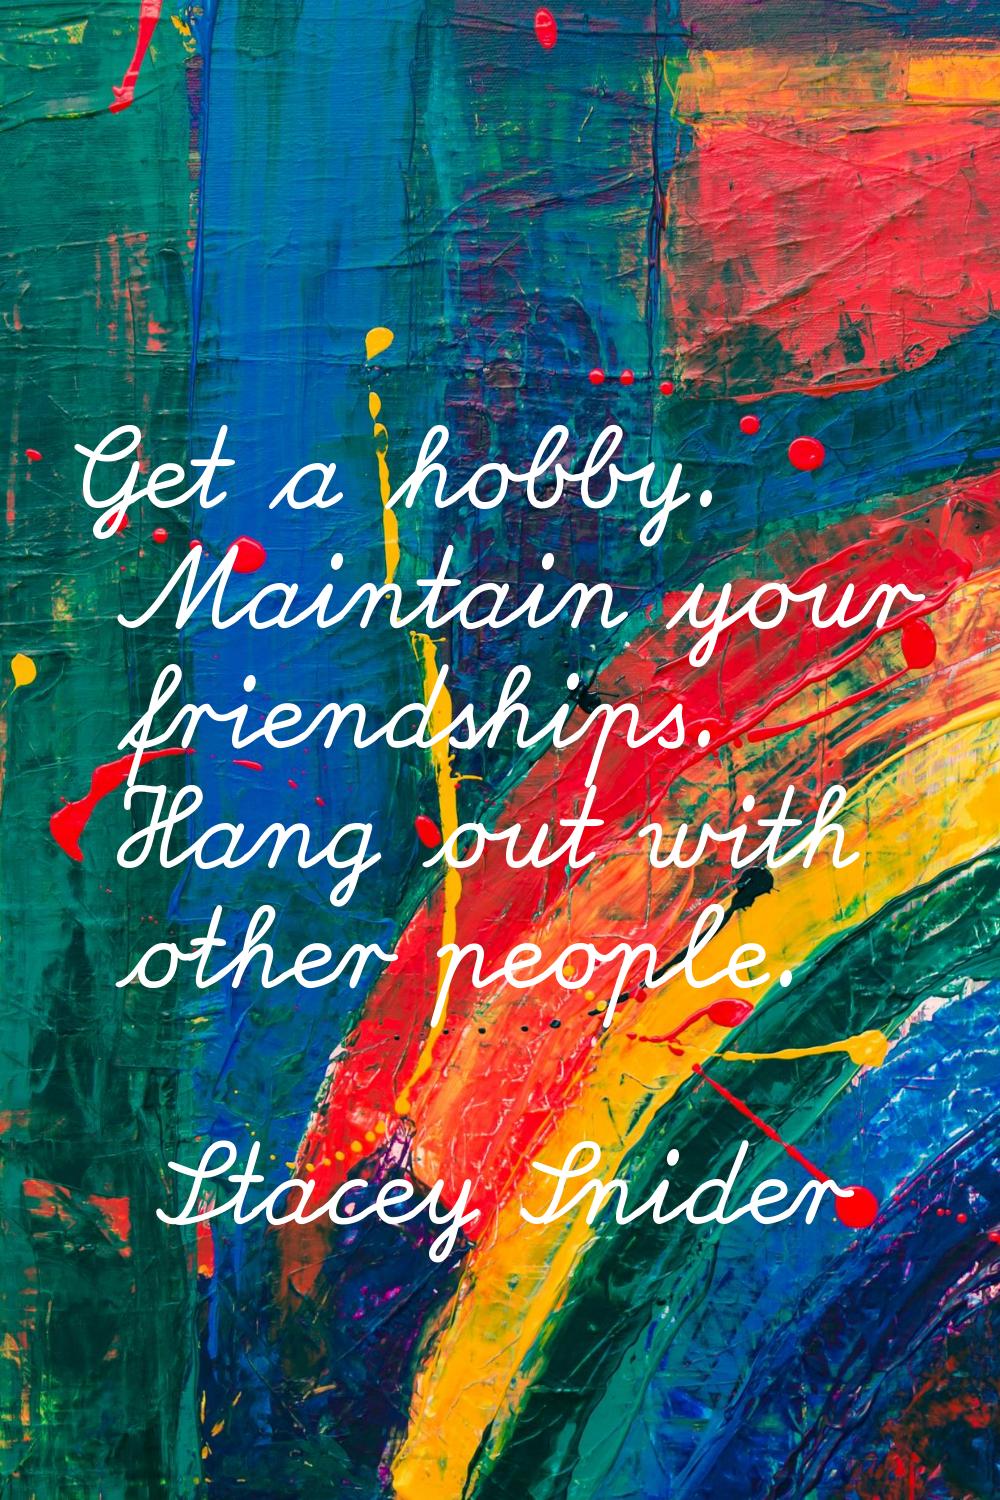 Get a hobby. Maintain your friendships. Hang out with other people.